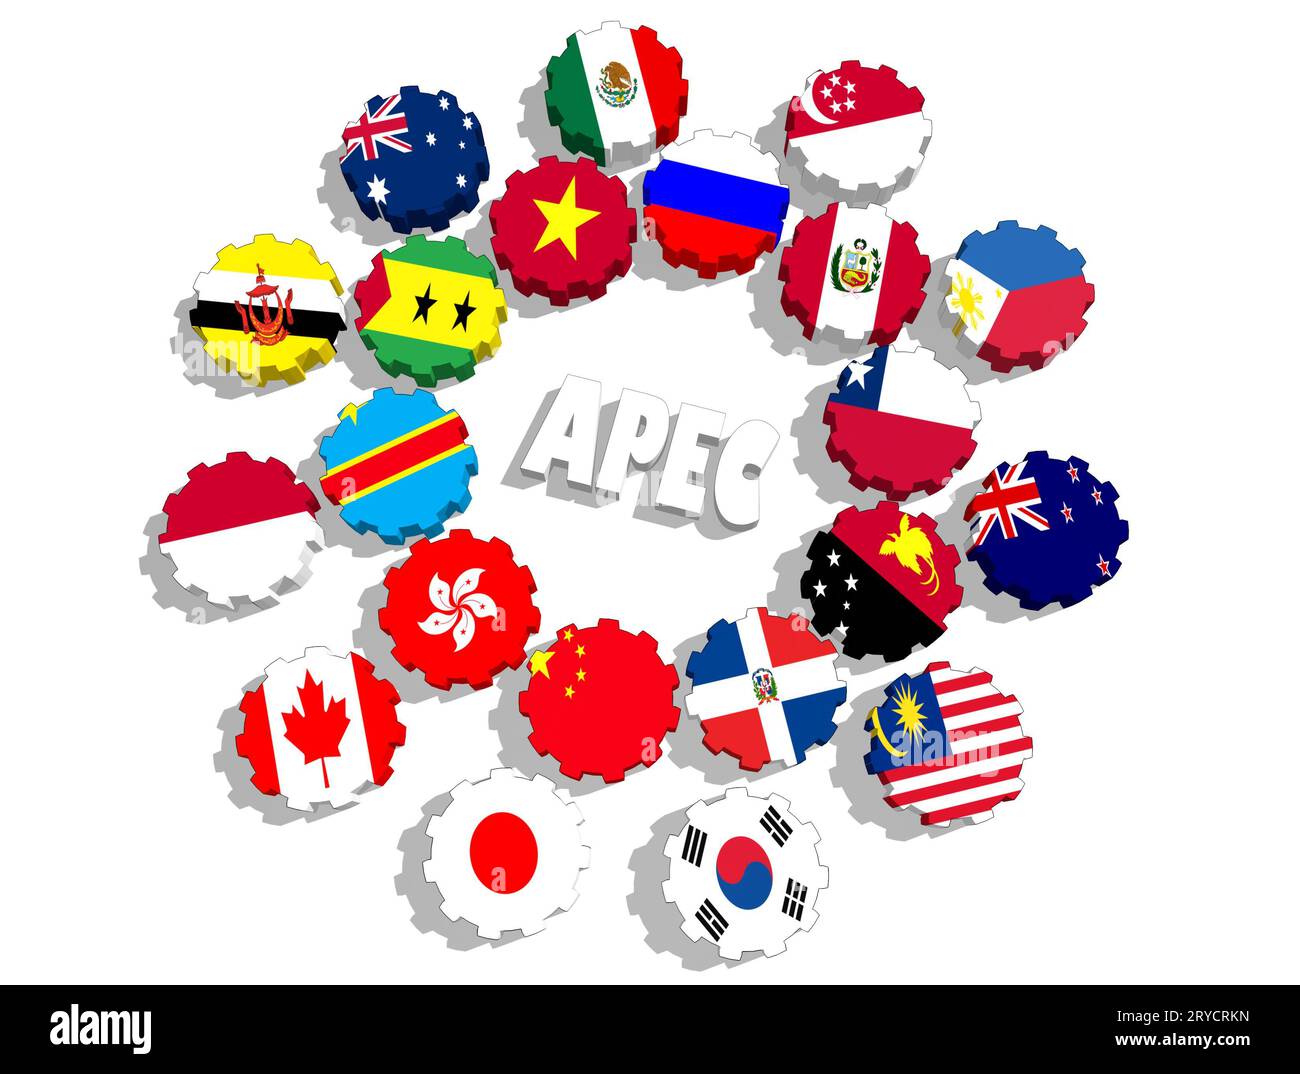 Asia-Pacific Economic Cooperation members national flags Stock Photo